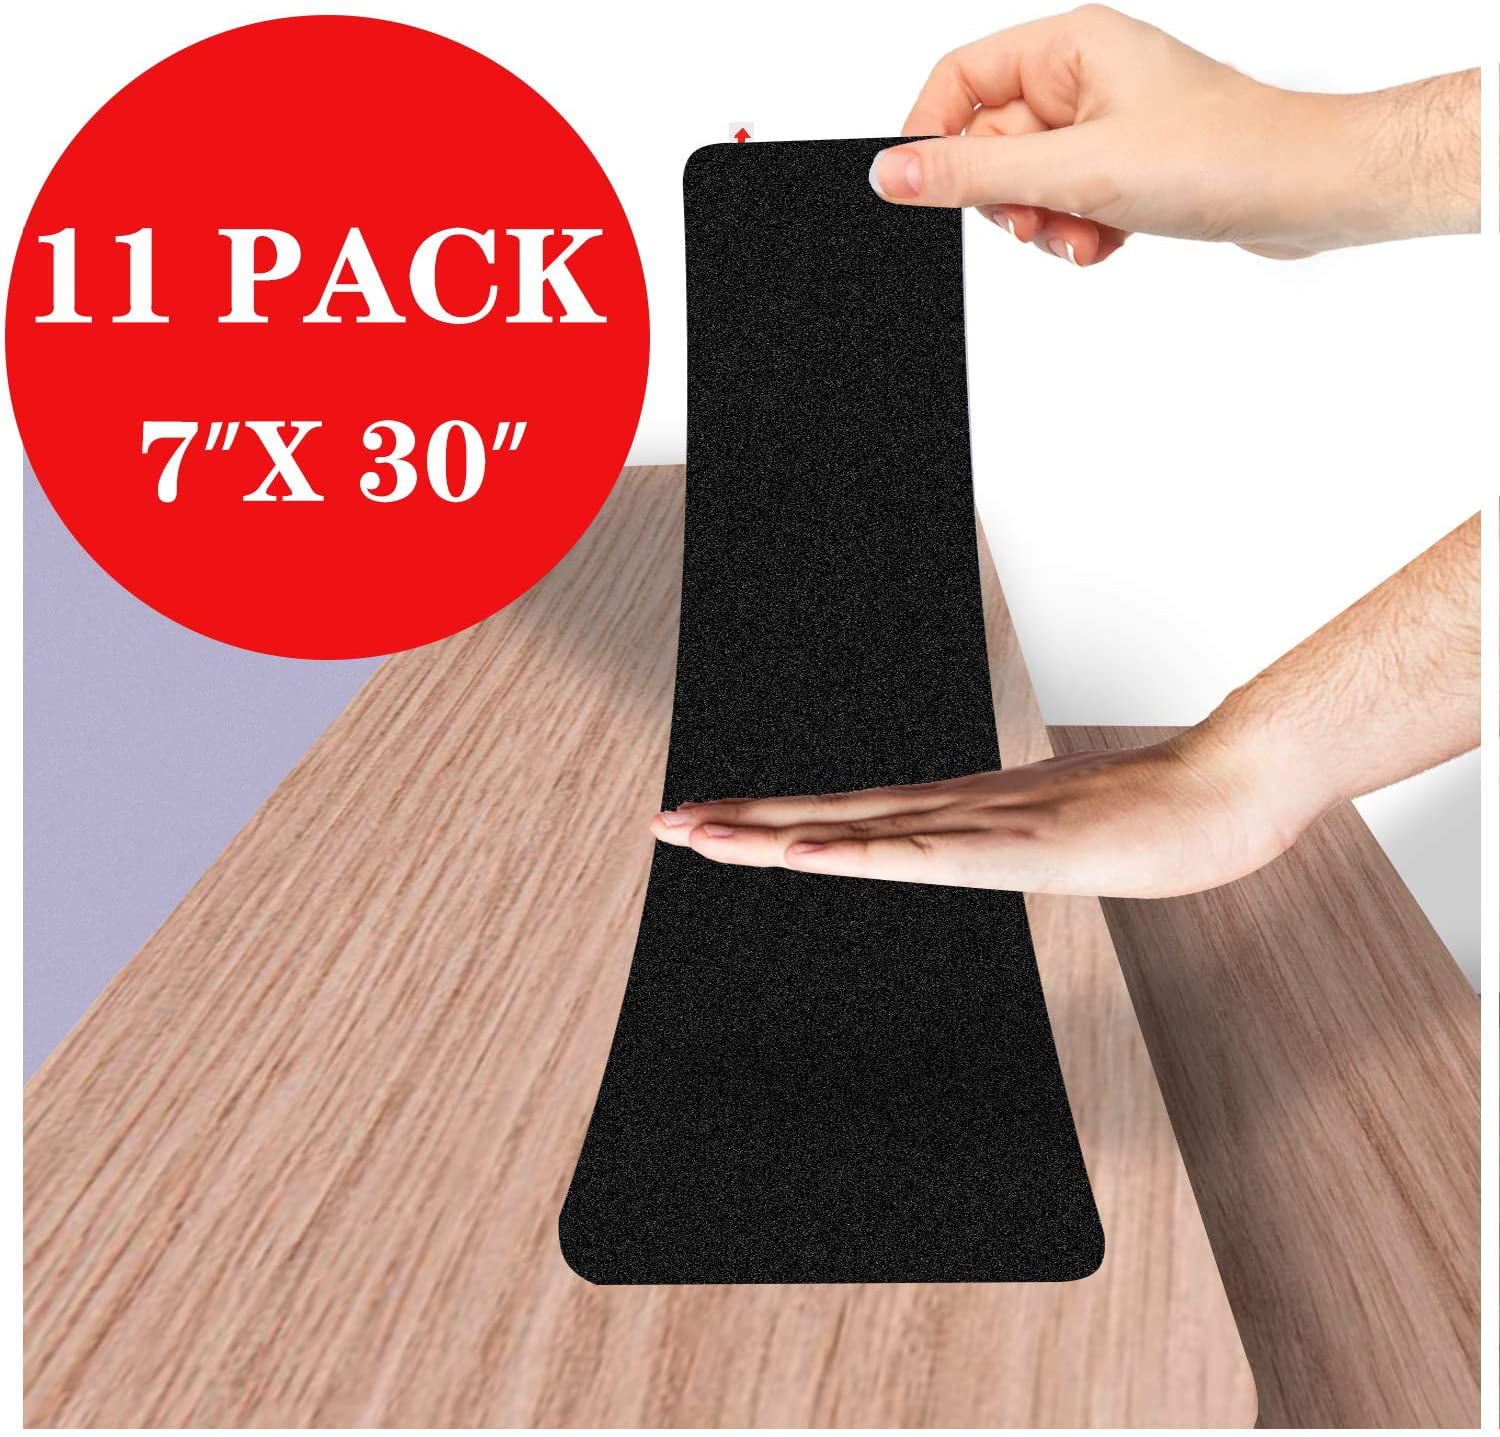 NON SLIP TAPE FOR STAIRS FLOORS ANTI SKID STRONG GRIP ADHESIVE STRIPS 16x Pack 